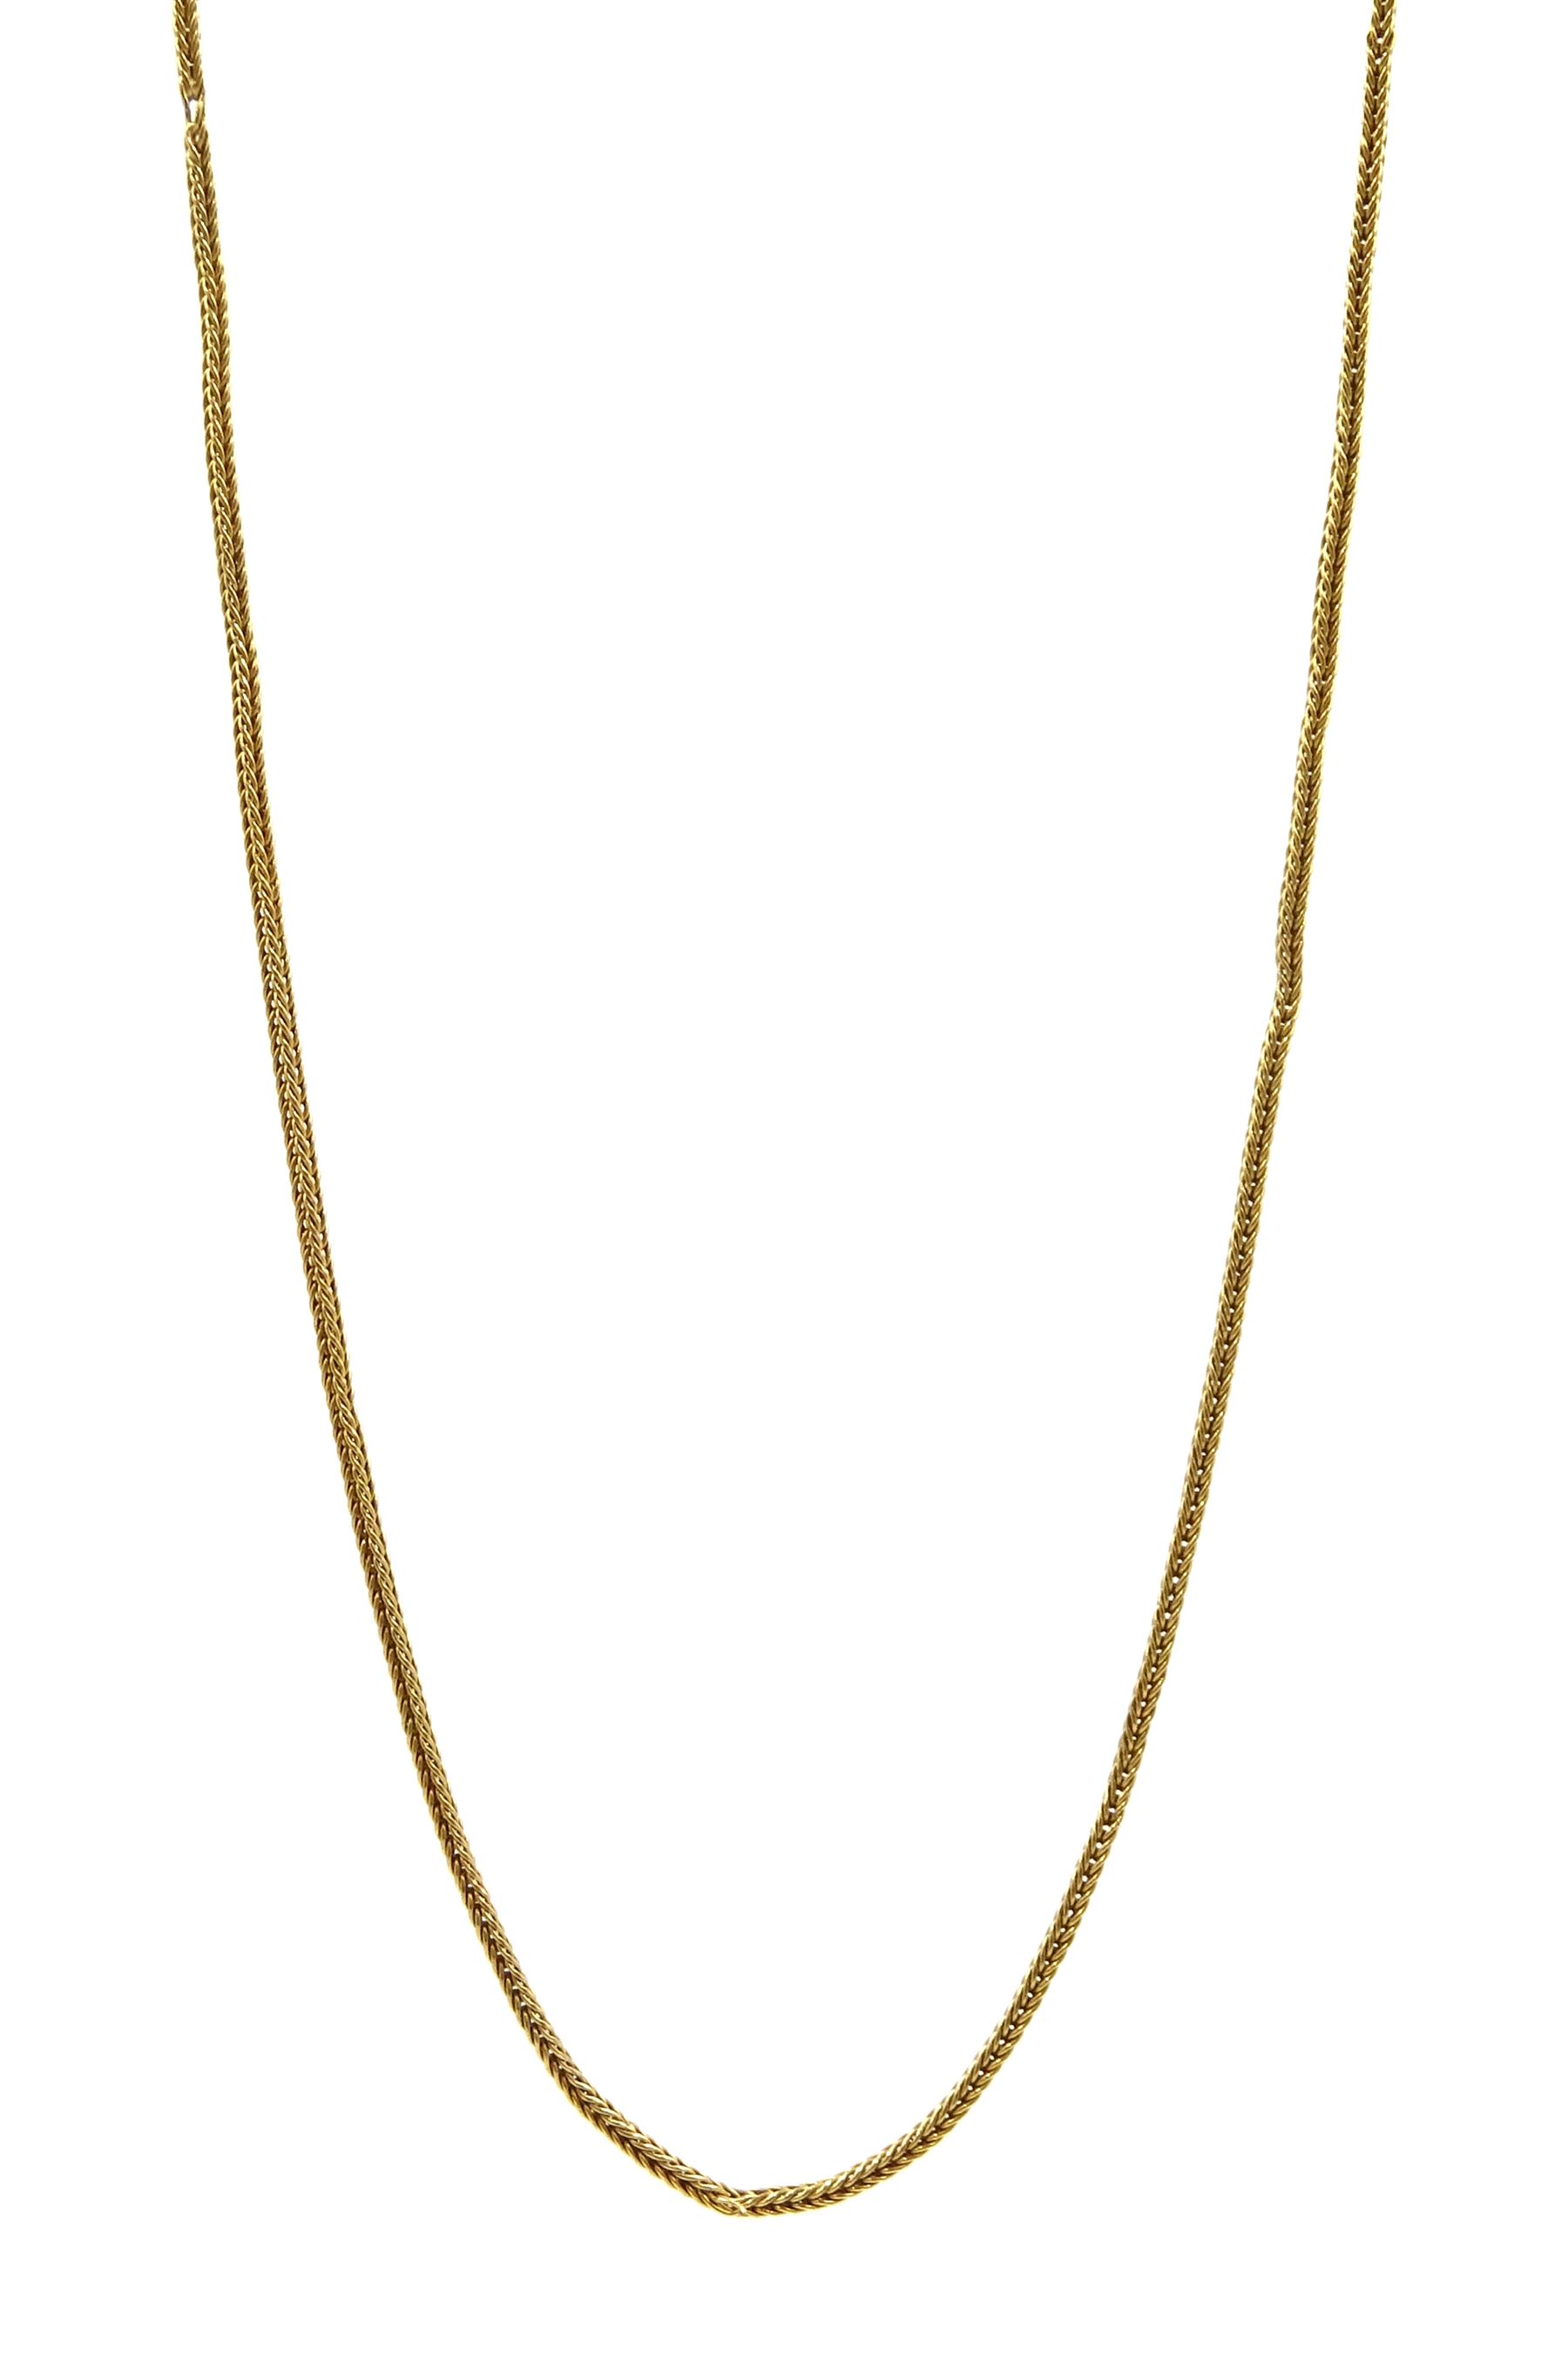 Gold foxtail link necklace tested to 20.5ct